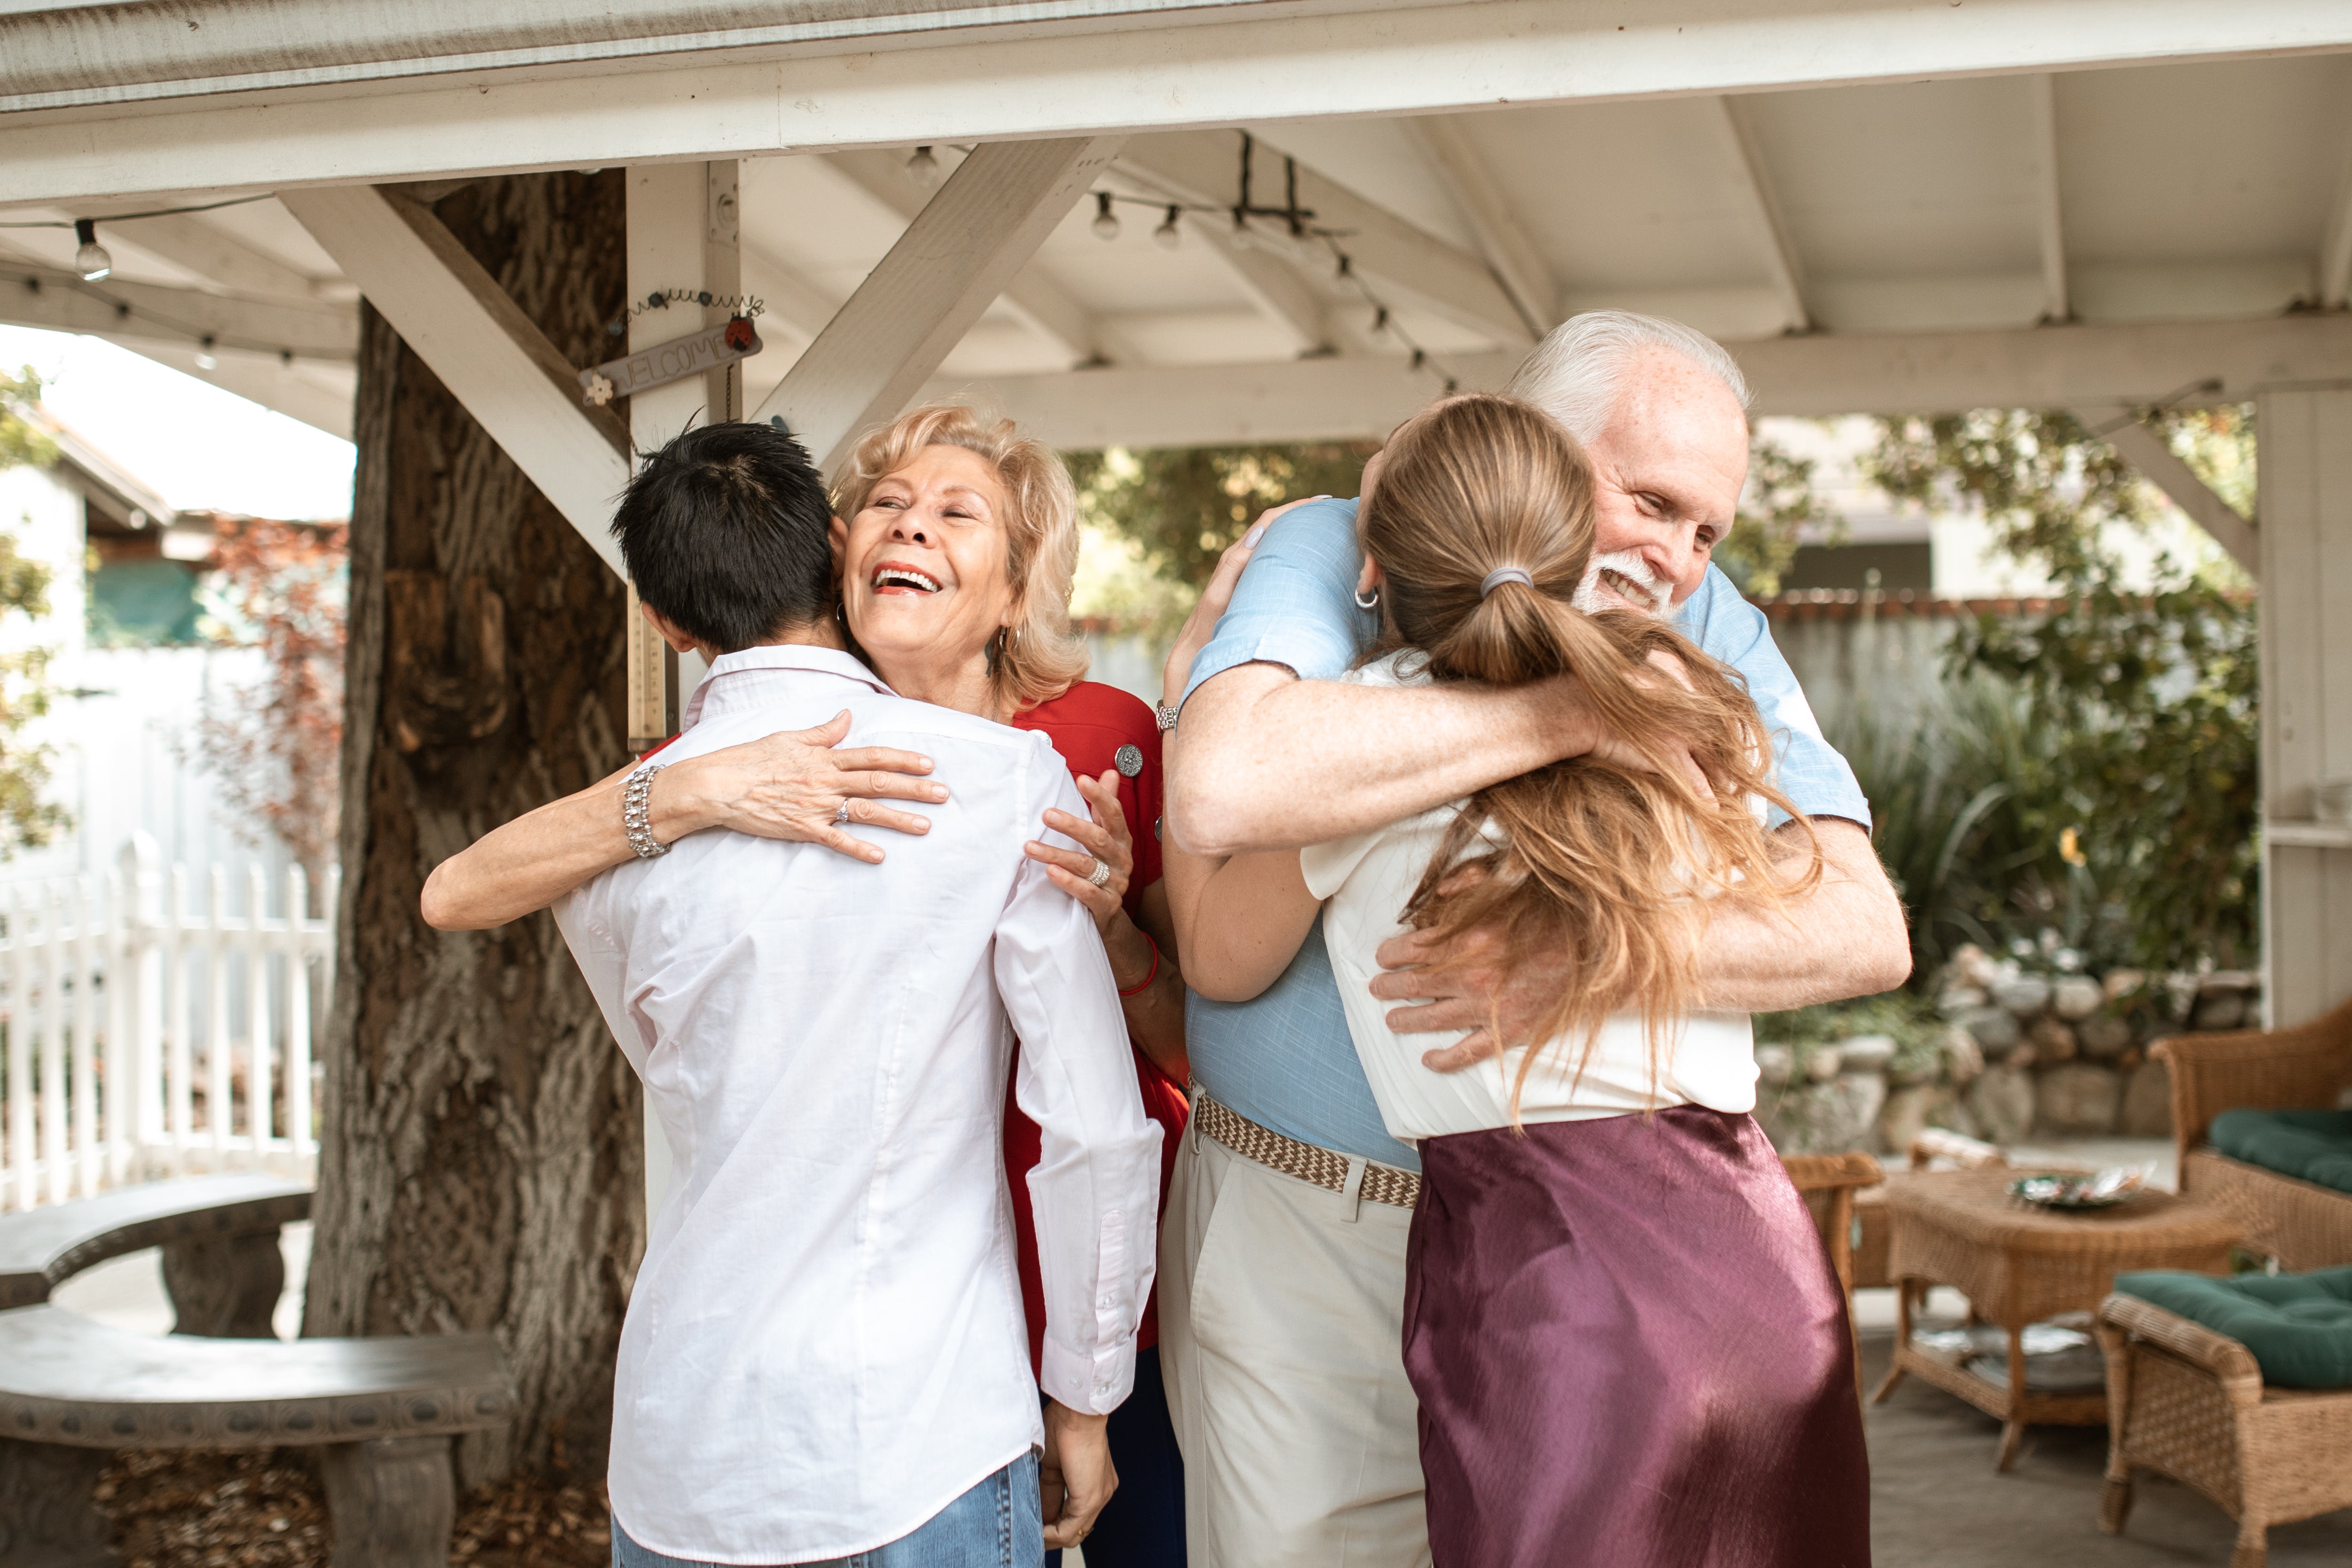 An elderly couple embracing their son and daughter | Source: Pexels